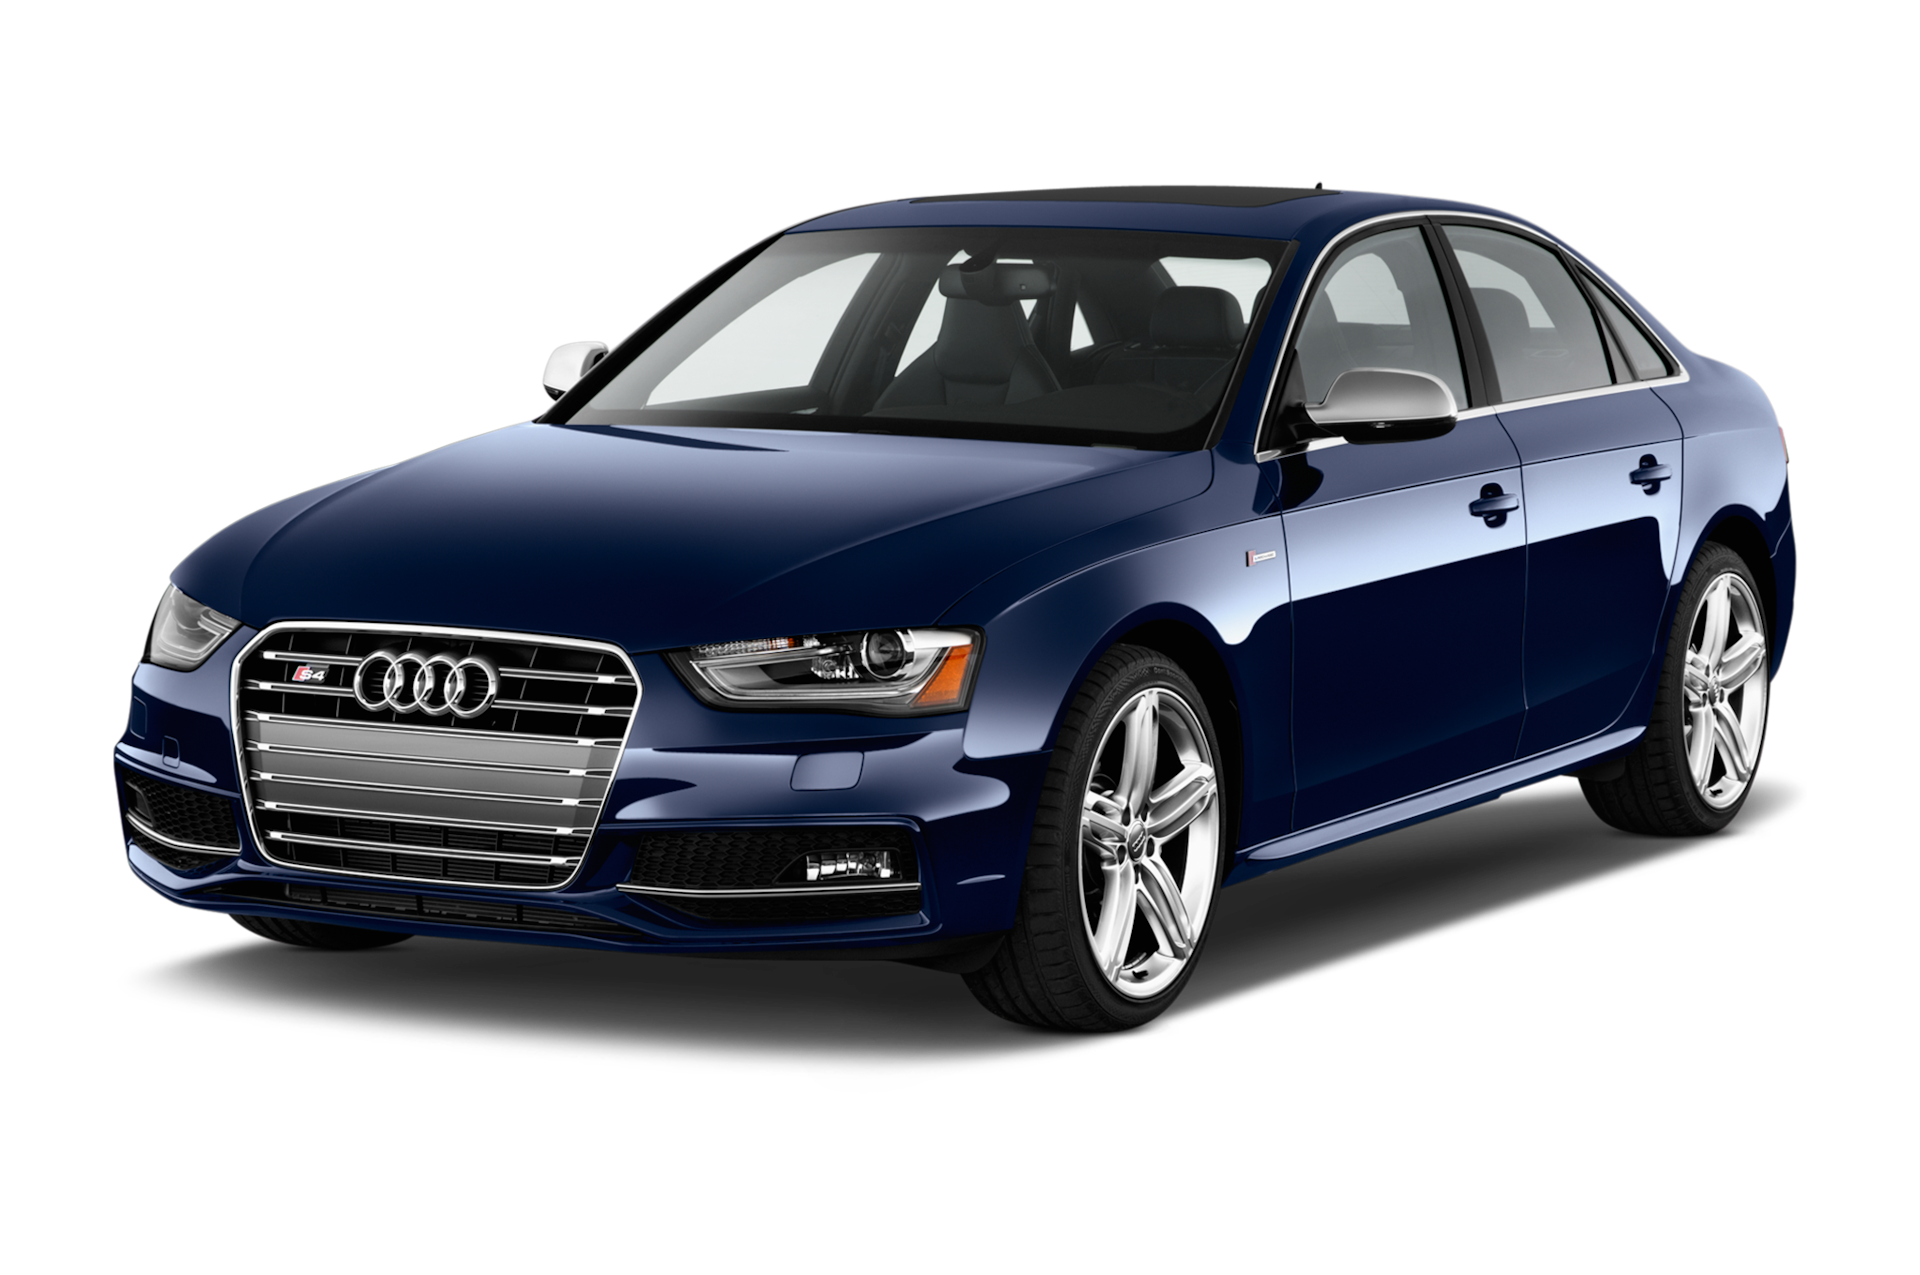 2013 Audi S4 Prices, Reviews, and Photos - MotorTrend